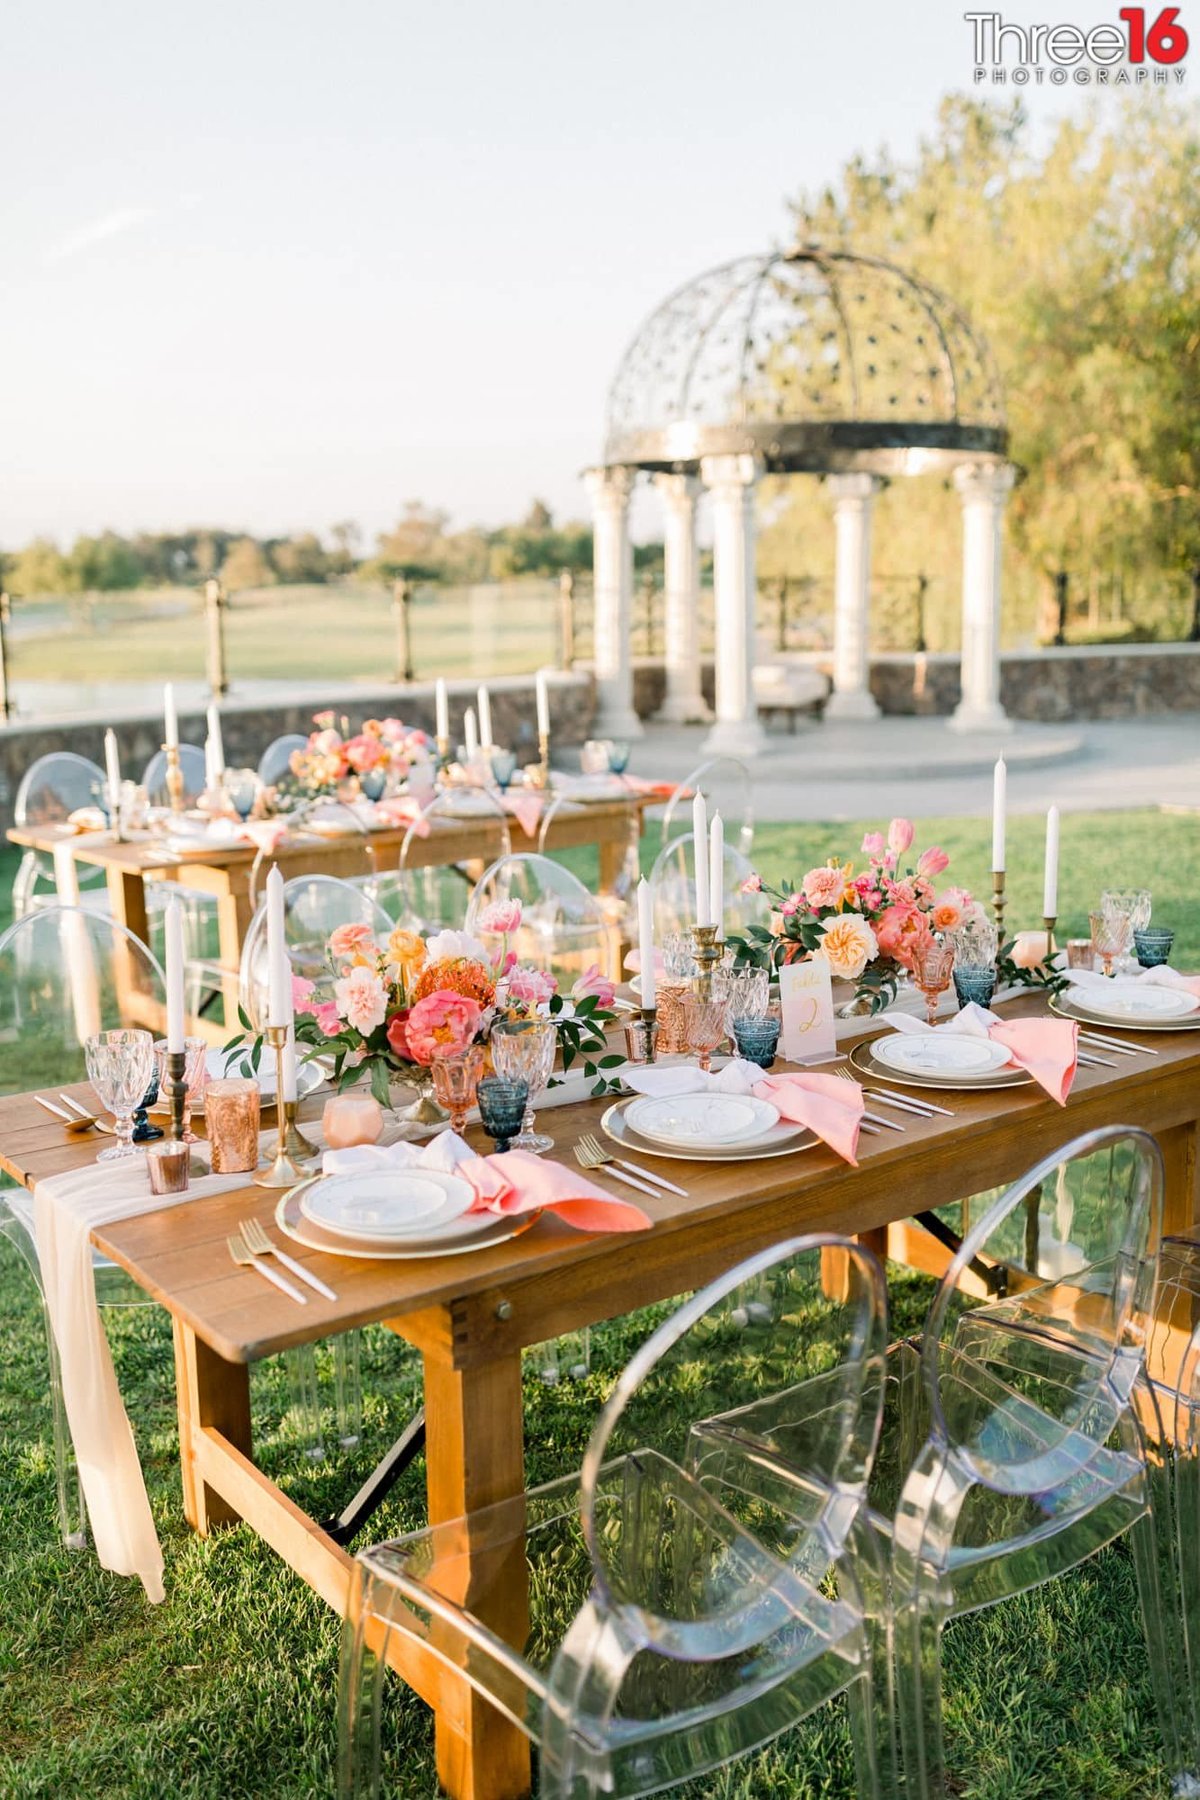 Beautifully decorated outdoor wedding reception tables